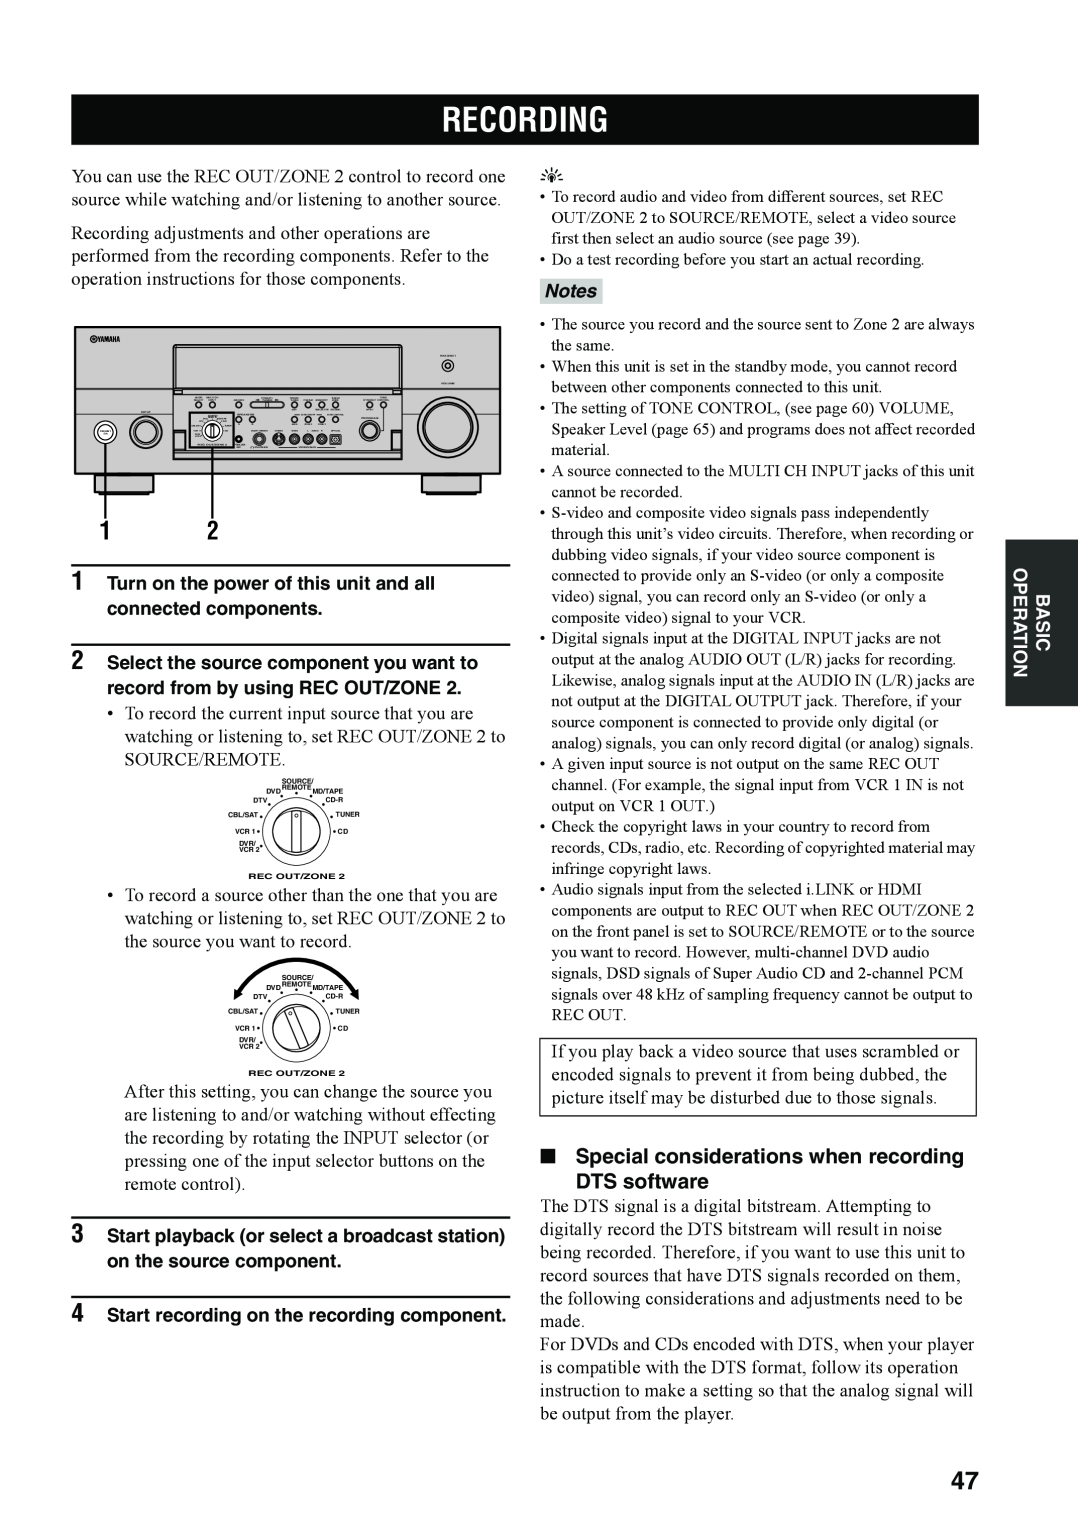 Yamaha RX-V4600 Recording, Special considerations when recording DTS software, Start recording on the recording component 